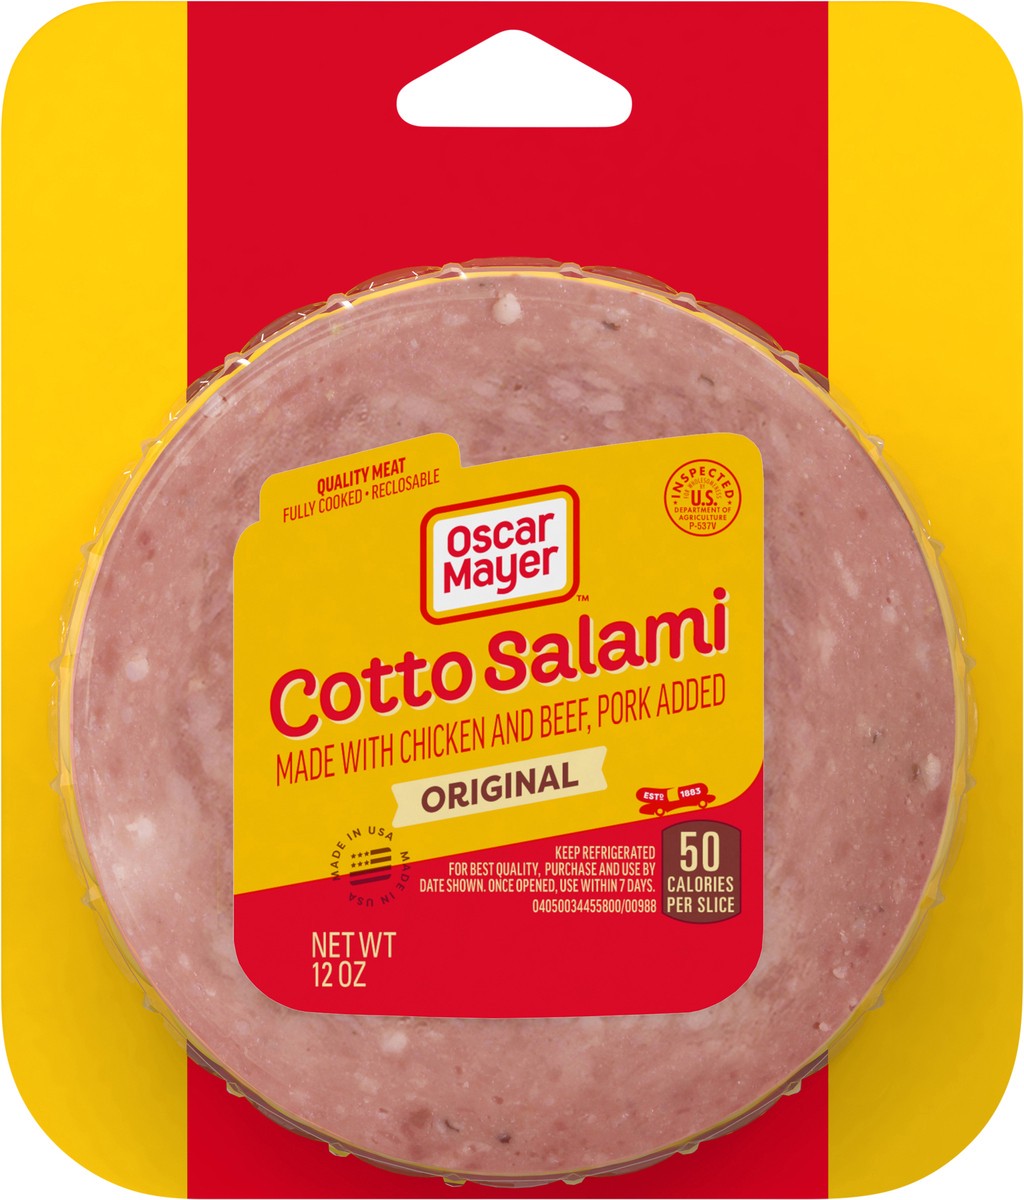 slide 6 of 9, Oscar Mayer Cotto Salami Made with Chicken And Beef, Pork Added Sliced Lunch Meat, 12 oz. Pack, 12 oz